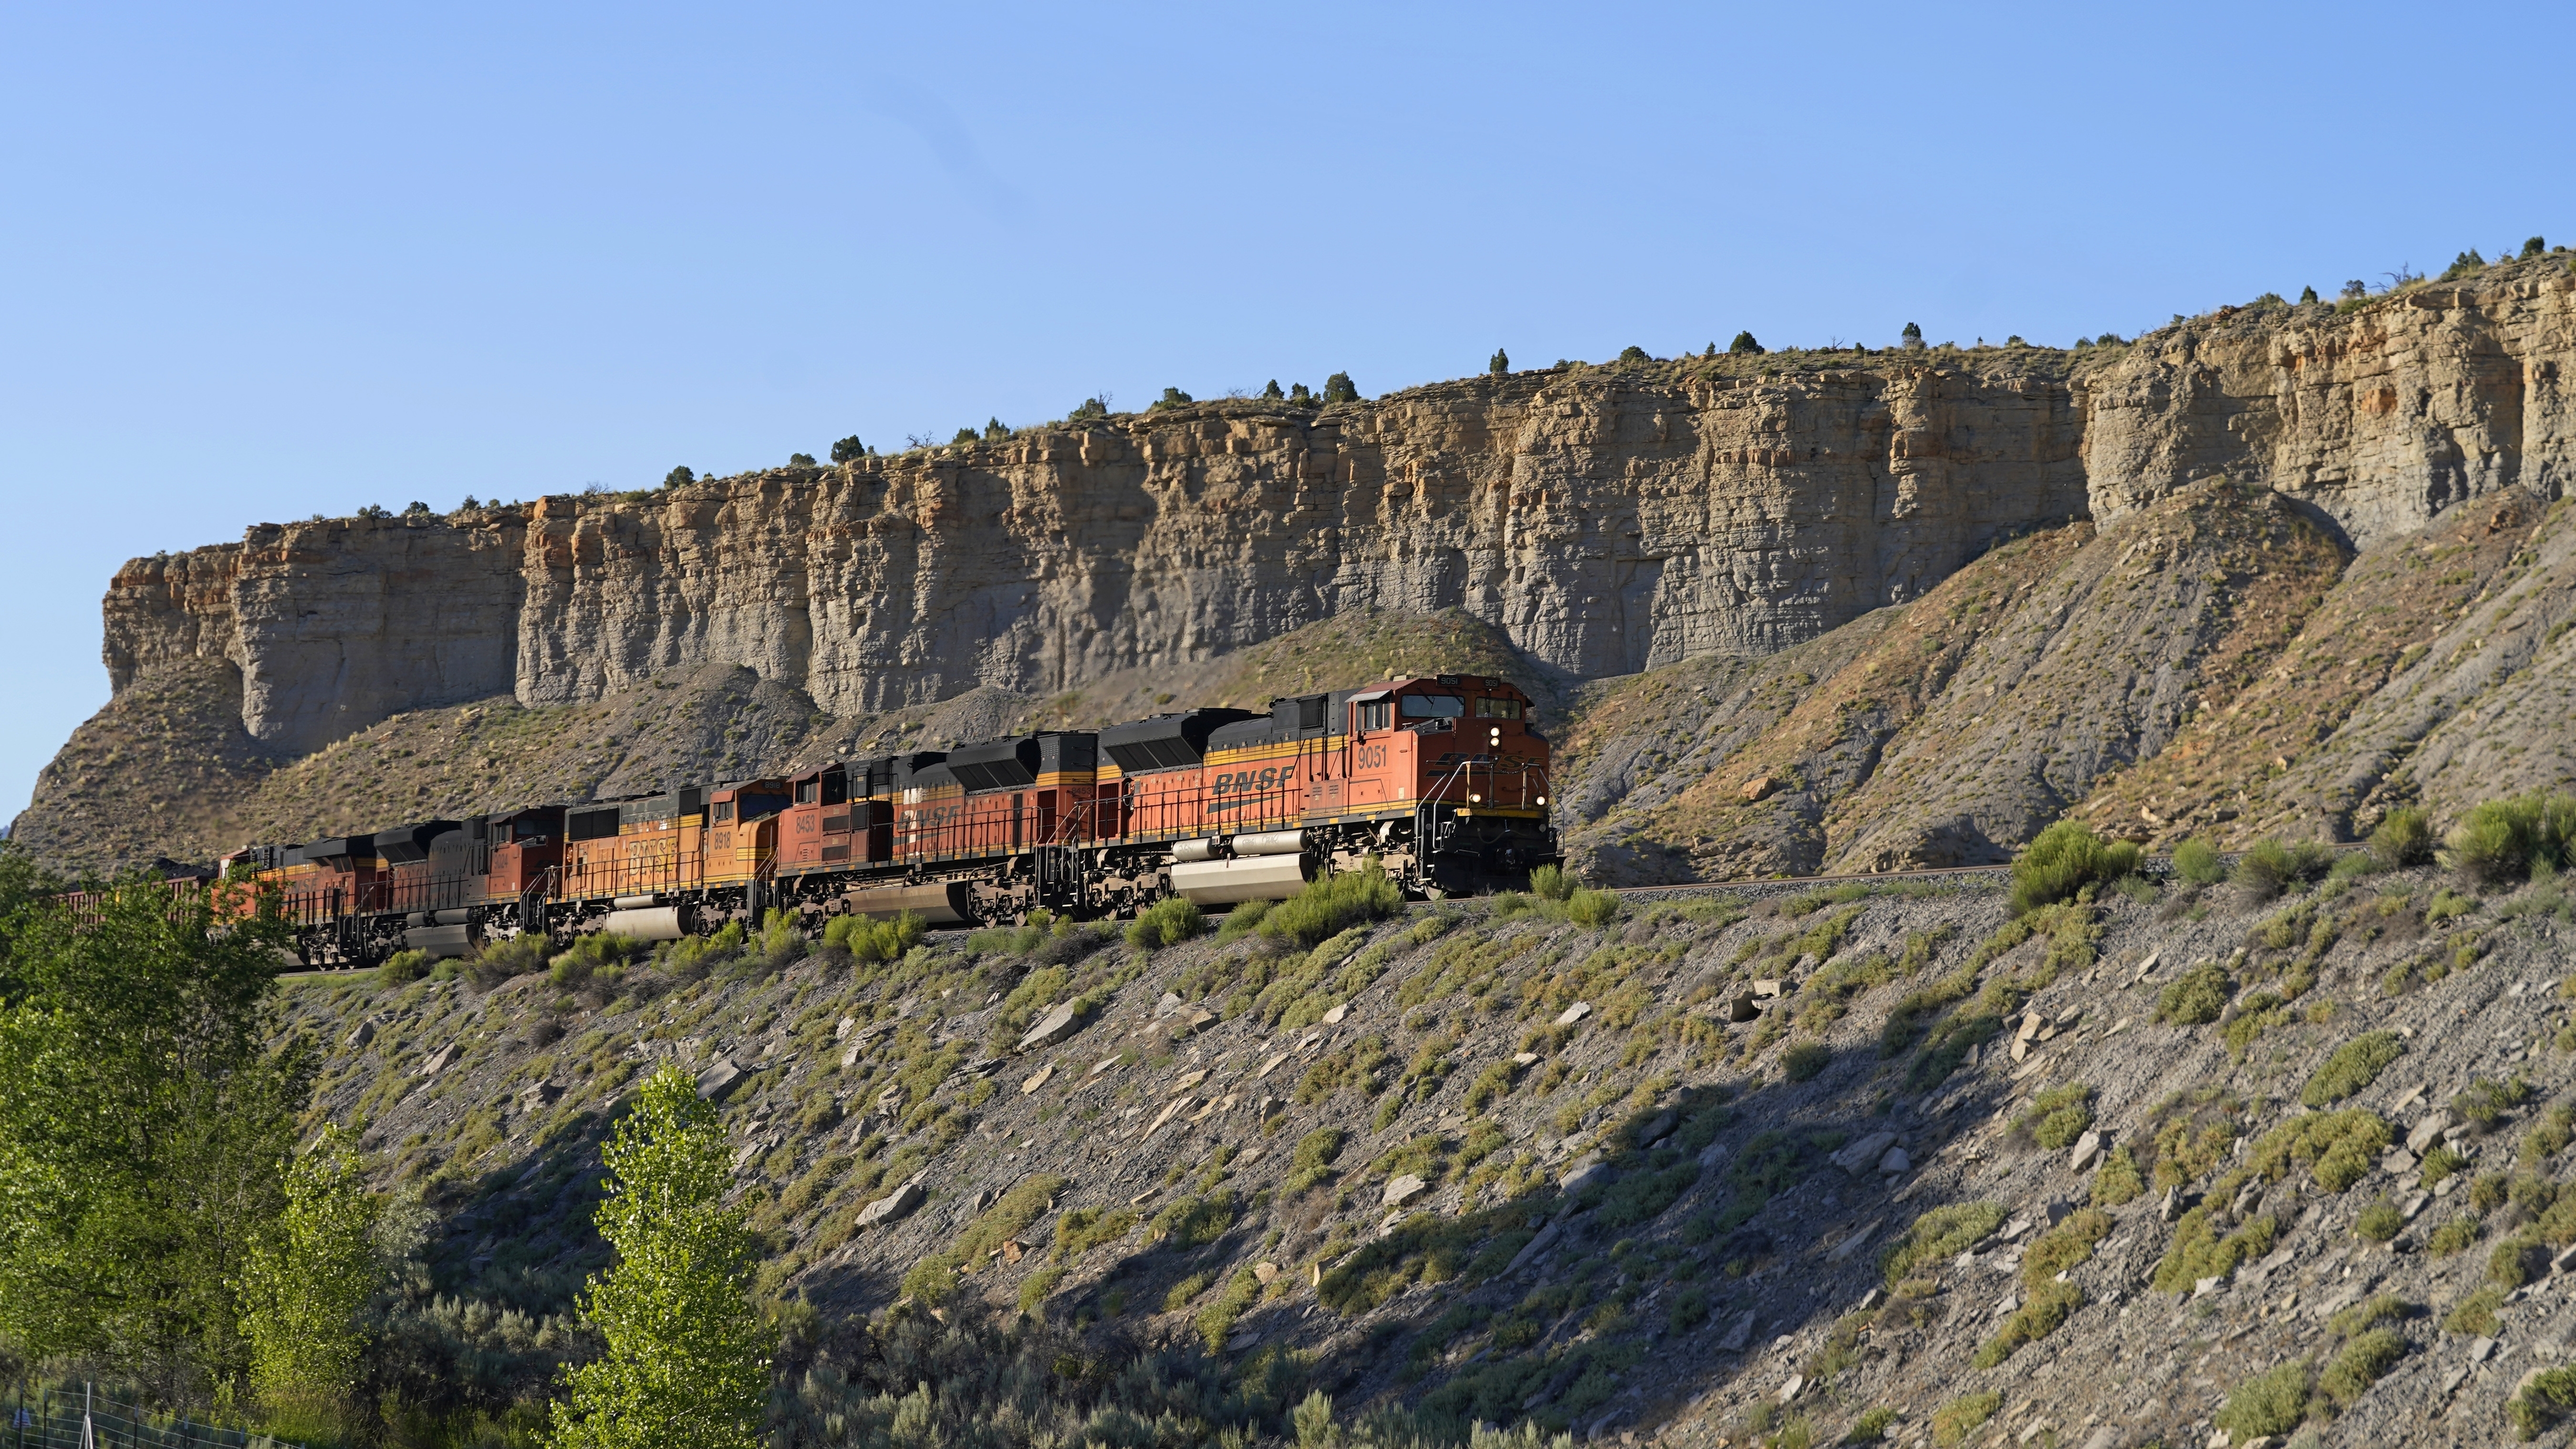 Federal funding coming to 2 Montana railroad projects